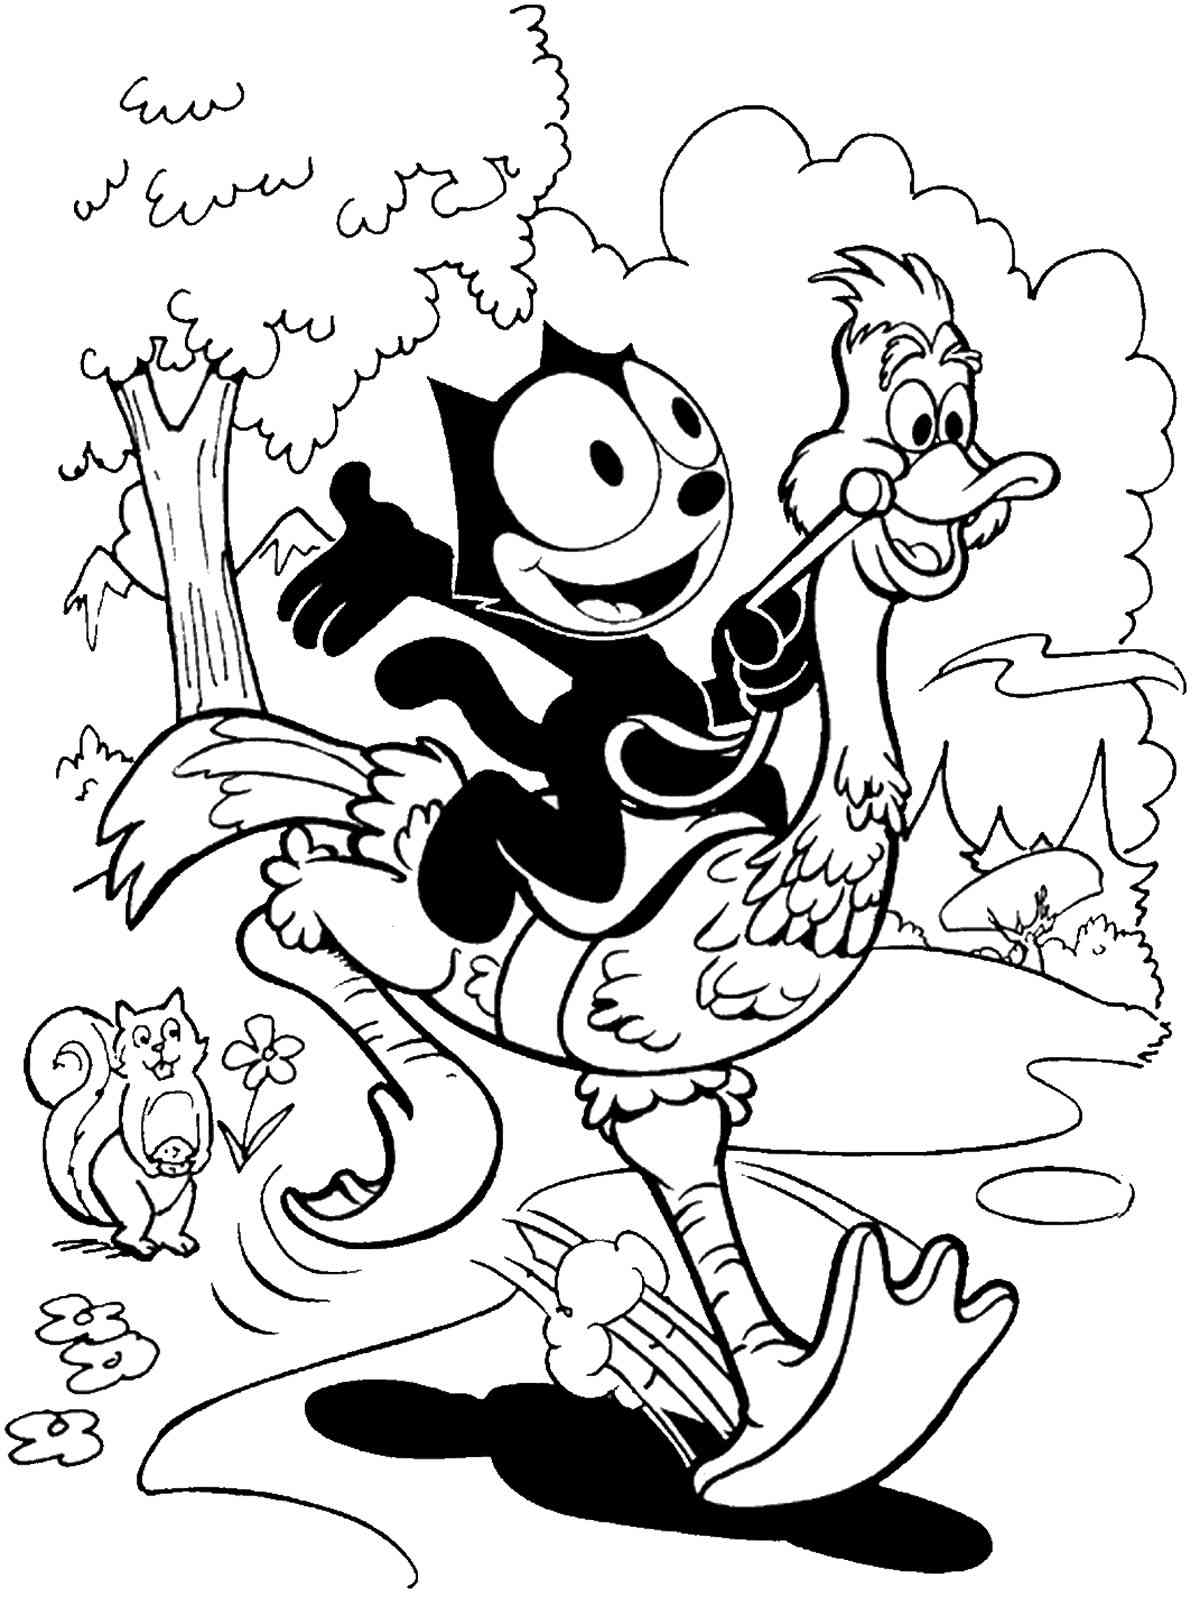 Felix The Cat 7 coloring page